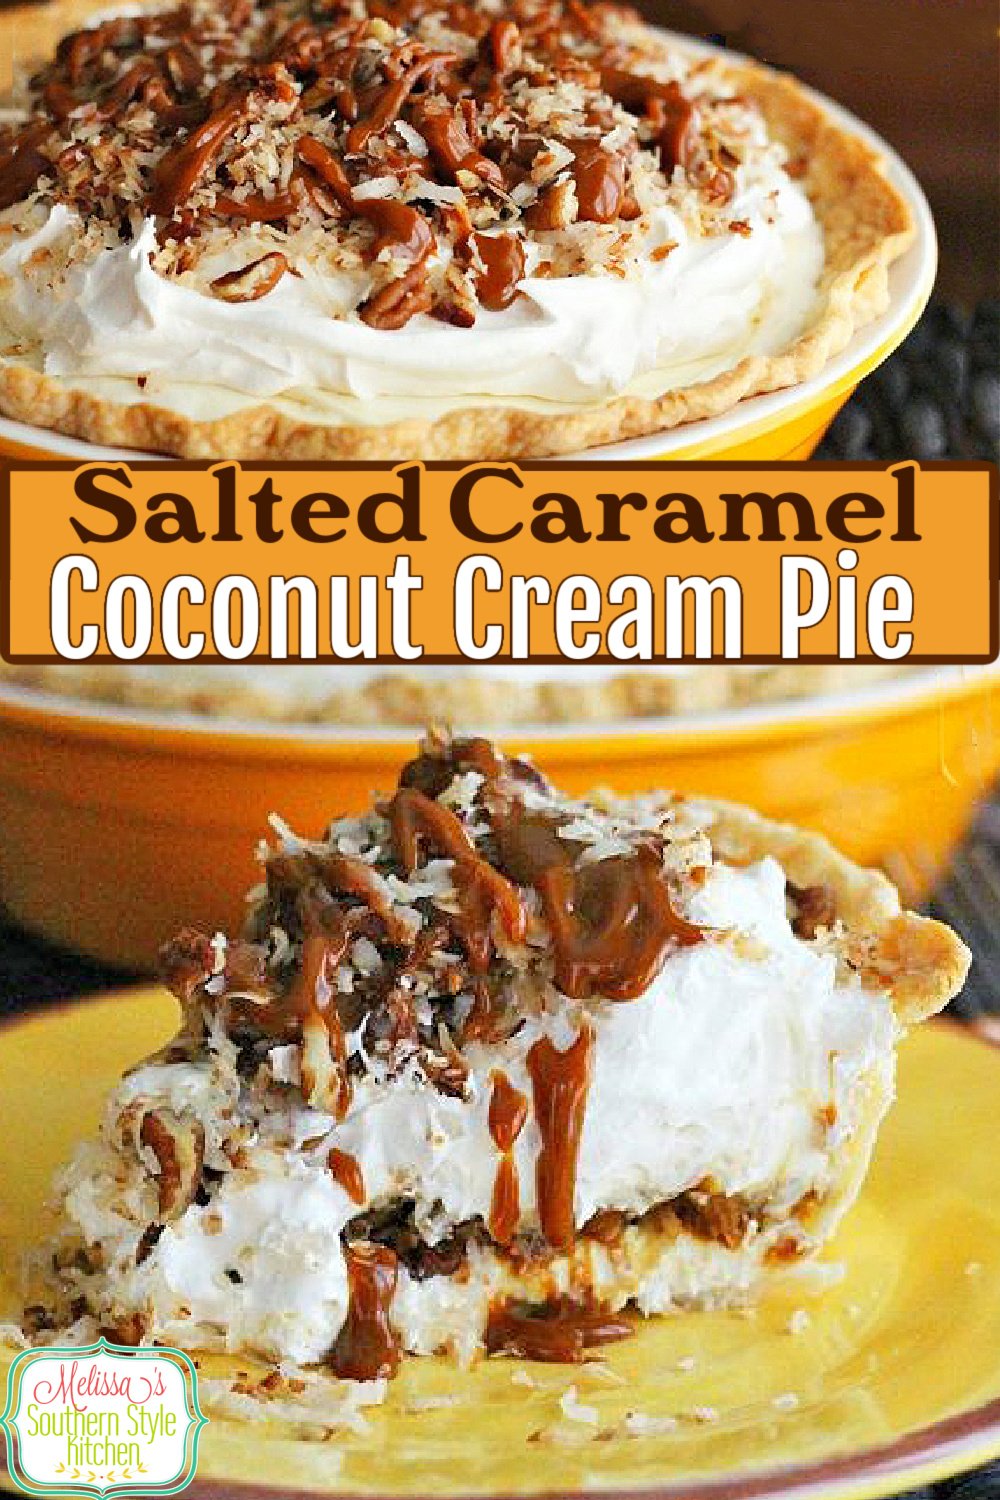 The sweet and salty fans in your life will flip for this Salted Caramel Coconut Cream Pie #coconutcreampie #caramelpie #saltedcaramel #pierecipes #coconut #desserts #dessertfoodrecipes #food #southernfood #southernrecipes via @melissasssk